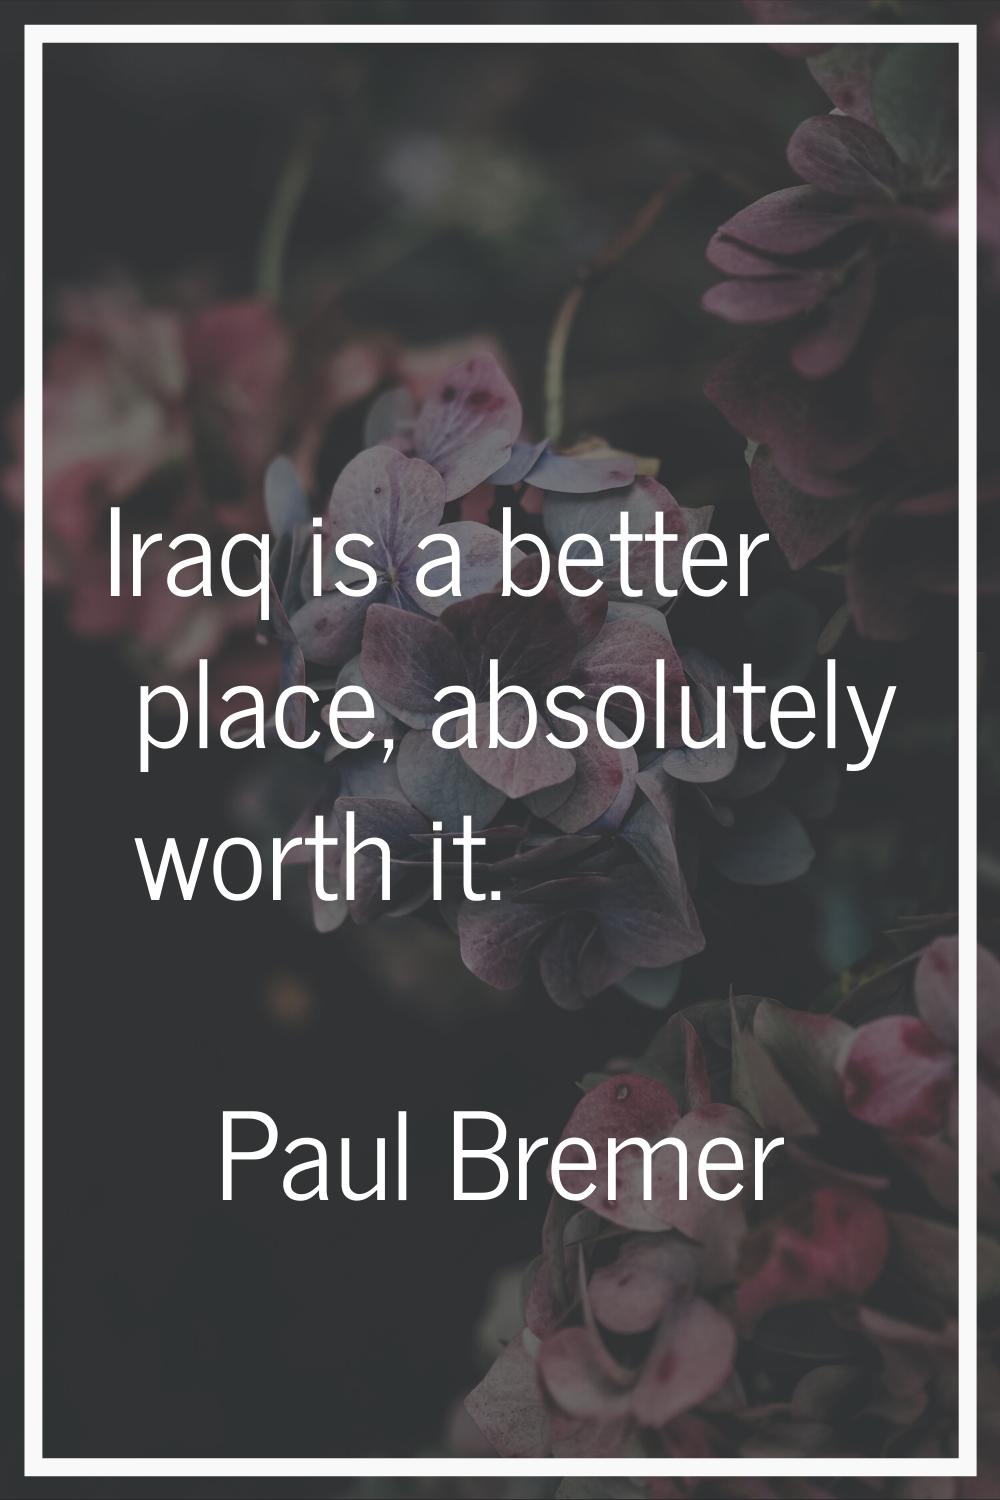 Iraq is a better place, absolutely worth it.